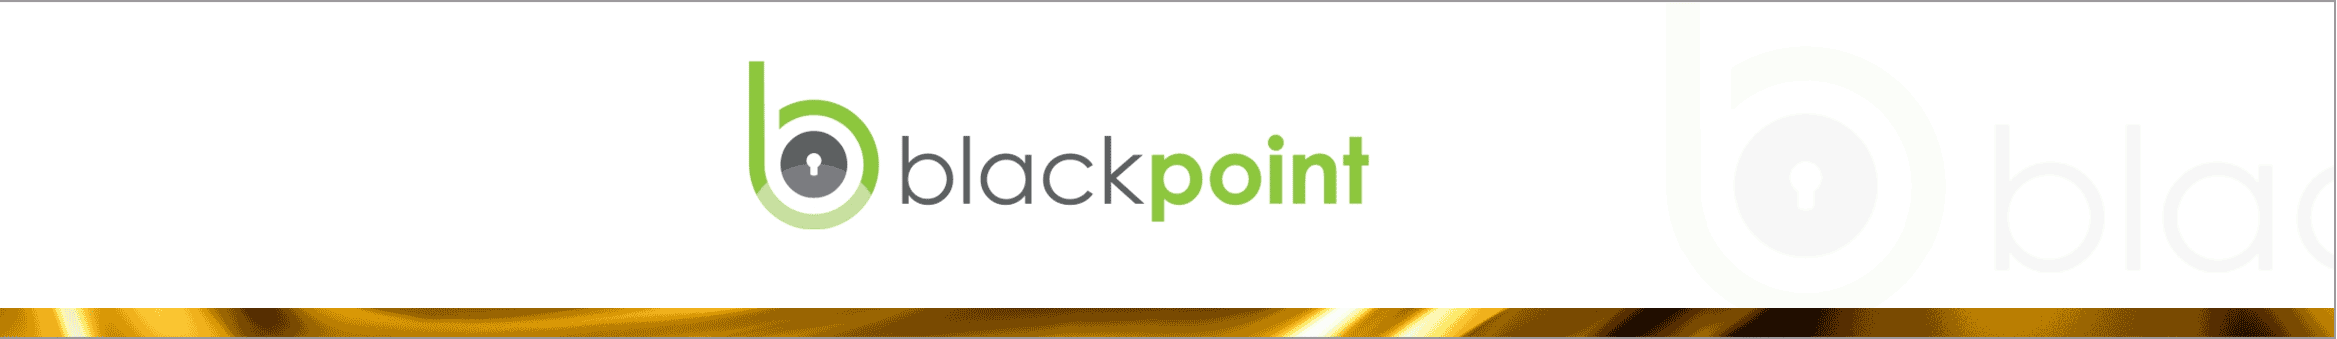 blackpointcyber